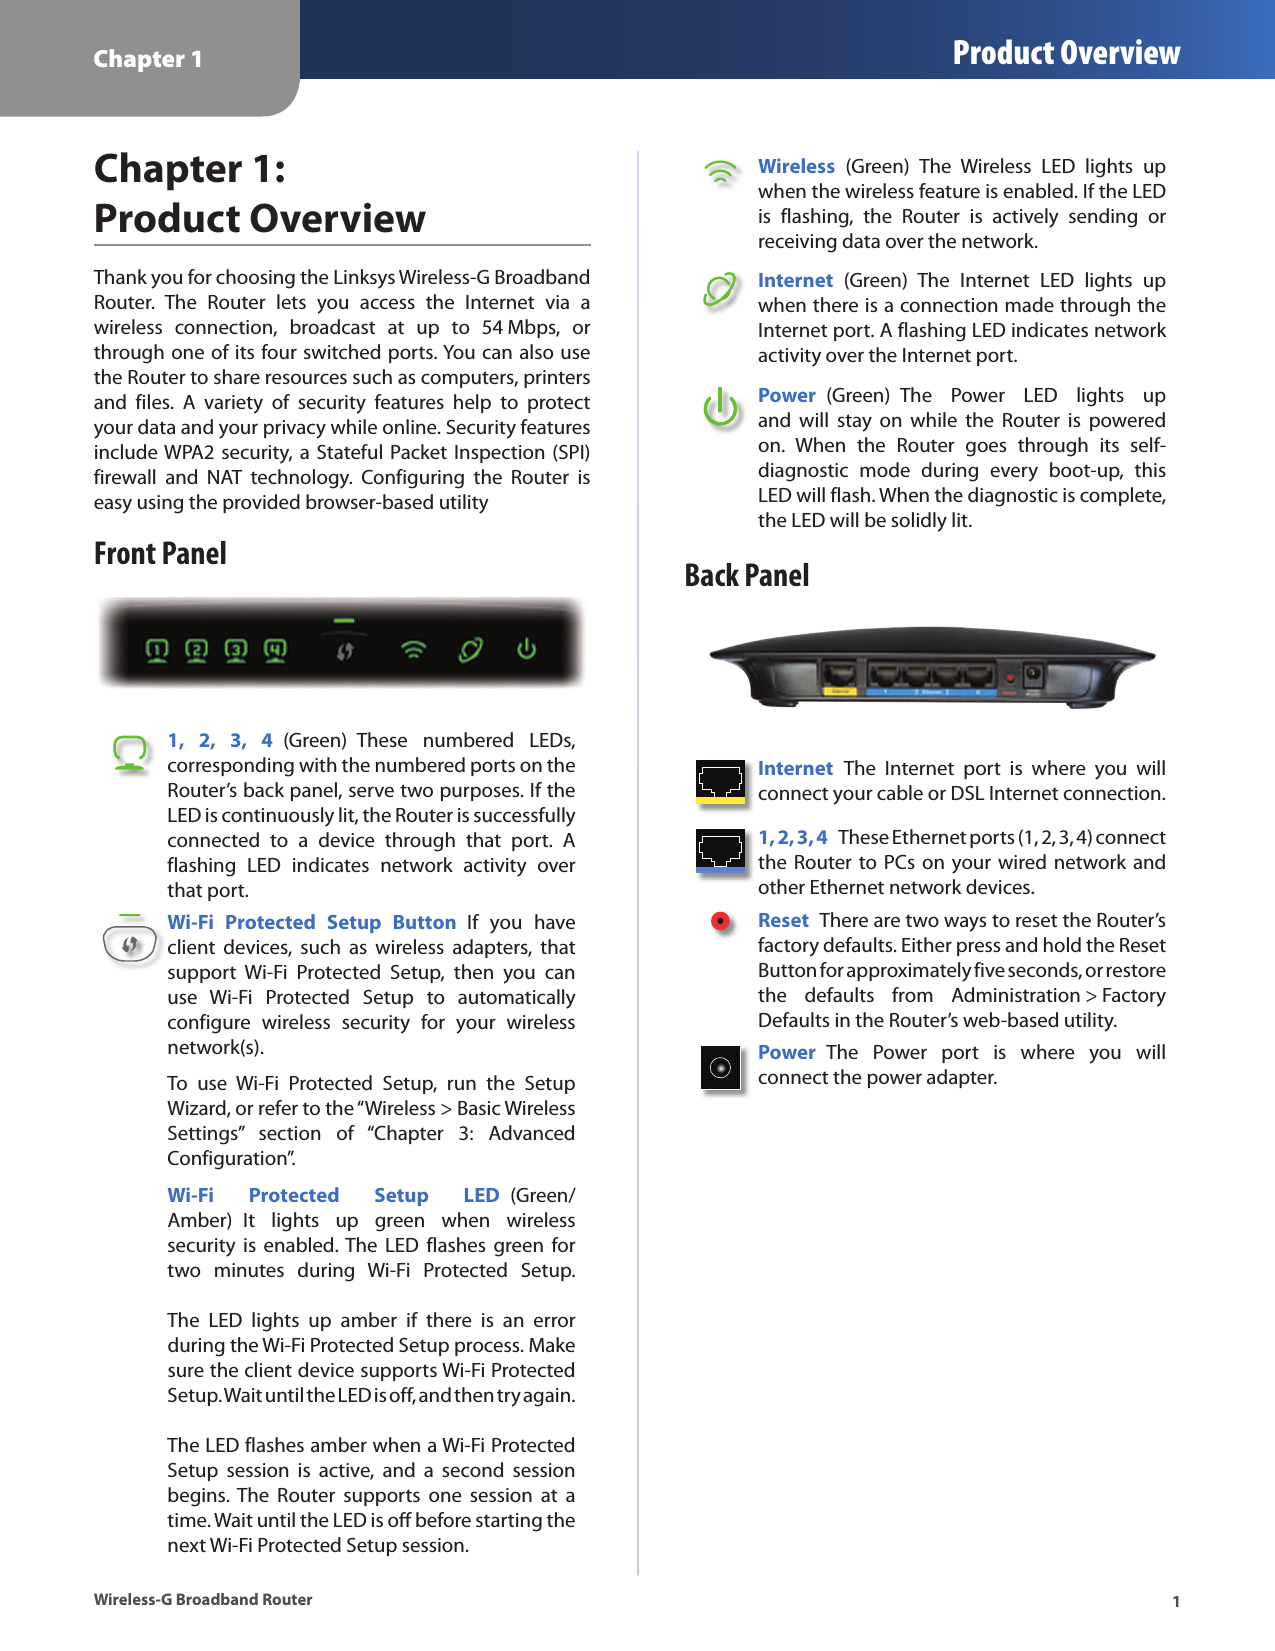 Chapter 1 Product Overview1Wireless-G Broadband RouterChapter 1:  Product OverviewThank you for choosing the Linksys Wireless-G Broadband Router.  The  Router  lets  you  access  the  Internet  via  a  wireless  connection,  broadcast  at  up  to  54 Mbps,  or through one of its four switched ports. You can also use the Router to share resources such as computers, printers and  files.  A  variety  of  security  features  help  to  protect your data and your privacy while online. Security features include WPA2 security, a Stateful Packet Inspection (SPI) firewall  and  NAT  technology.  Configuring  the  Router  is easy using the provided browser-based utilityFront Panel1,  2,  3,  4  (Green)  These  numbered  LEDs, corresponding with the numbered ports on the Router’s back panel, serve two purposes. If the LED is continuously lit, the Router is successfully connected  to  a  device  through  that  port.  A flashing  LED  indicates  network  activity  over that port.Wi-Fi  Protected  Setup  Button  If  you  have client  devices,  such  as  wireless  adapters,  that support  Wi-Fi  Protected  Setup,  then  you  can use  Wi-Fi  Protected  Setup  to  automatically configure  wireless  security  for  your  wireless network(s).To  use  Wi-Fi  Protected  Setup,  run  the  Setup Wizard, or refer to the “Wireless &gt; Basic Wireless Settings”  section  of  “Chapter  3:  Advanced Configuration”.Wi-Fi  Protected  Setup  LED  (Green/Amber)  It  lights  up  green  when  wireless security  is  enabled. The  LED flashes  green  for two  minutes  during  Wi-Fi  Protected  Setup.    The  LED  lights  up  amber  if  there  is  an  error during the Wi-Fi Protected Setup process. Make sure the client device supports Wi-Fi Protected Setup. Wait until the LED is off, and then try again.   The LED flashes amber when a Wi-Fi Protected Setup  session  is  active,  and  a  second  session begins. The  Router  supports  one  session  at  a time. Wait until the LED is off before starting the next Wi-Fi Protected Setup session.Wireless  (Green)  The  Wireless  LED  lights  up when the wireless feature is enabled. If the LED is  flashing,  the  Router  is  actively  sending  or receiving data over the network.Internet  (Green)  The  Internet  LED  lights  up when there is a connection made through the Internet port. A flashing LED indicates network activity over the Internet port.Power  (Green)  The  Power  LED  lights  up and  will  stay  on  while  the  Router  is  powered on.  When  the  Router  goes  through  its  self-diagnostic  mode  during  every  boot-up,  this LED will flash. When the diagnostic is complete, the LED will be solidly lit.Back PanelInternet  The  Internet  port  is  where  you  will connect your cable or DSL Internet connection. 1, 2, 3, 4  These Ethernet ports (1, 2, 3, 4) connect the Router to PCs on your wired network and other Ethernet network devices. Reset  There are two ways to reset the Router’s factory defaults. Either press and hold the Reset Button for approximately five seconds, or restore the  defaults  from  Administration &gt; Factory Defaults in the Router’s web-based utility. Power  The  Power  port  is  where  you  will  connect the power adapter.